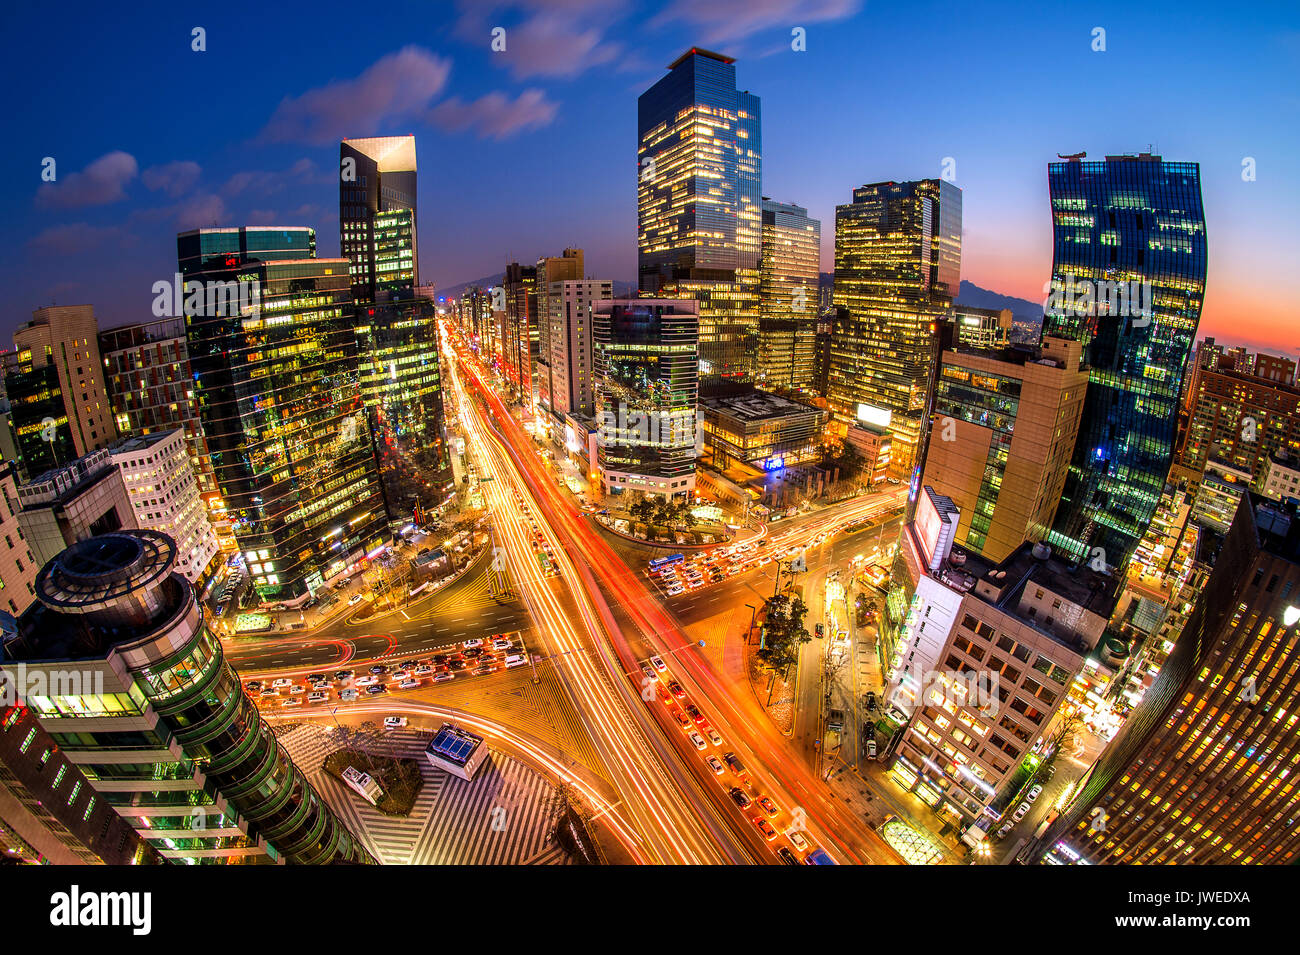 Cityscape of South Korea. Night traffic speeds through an intersection in the Gangnam district of Seoul,South Korea. Stock Photo